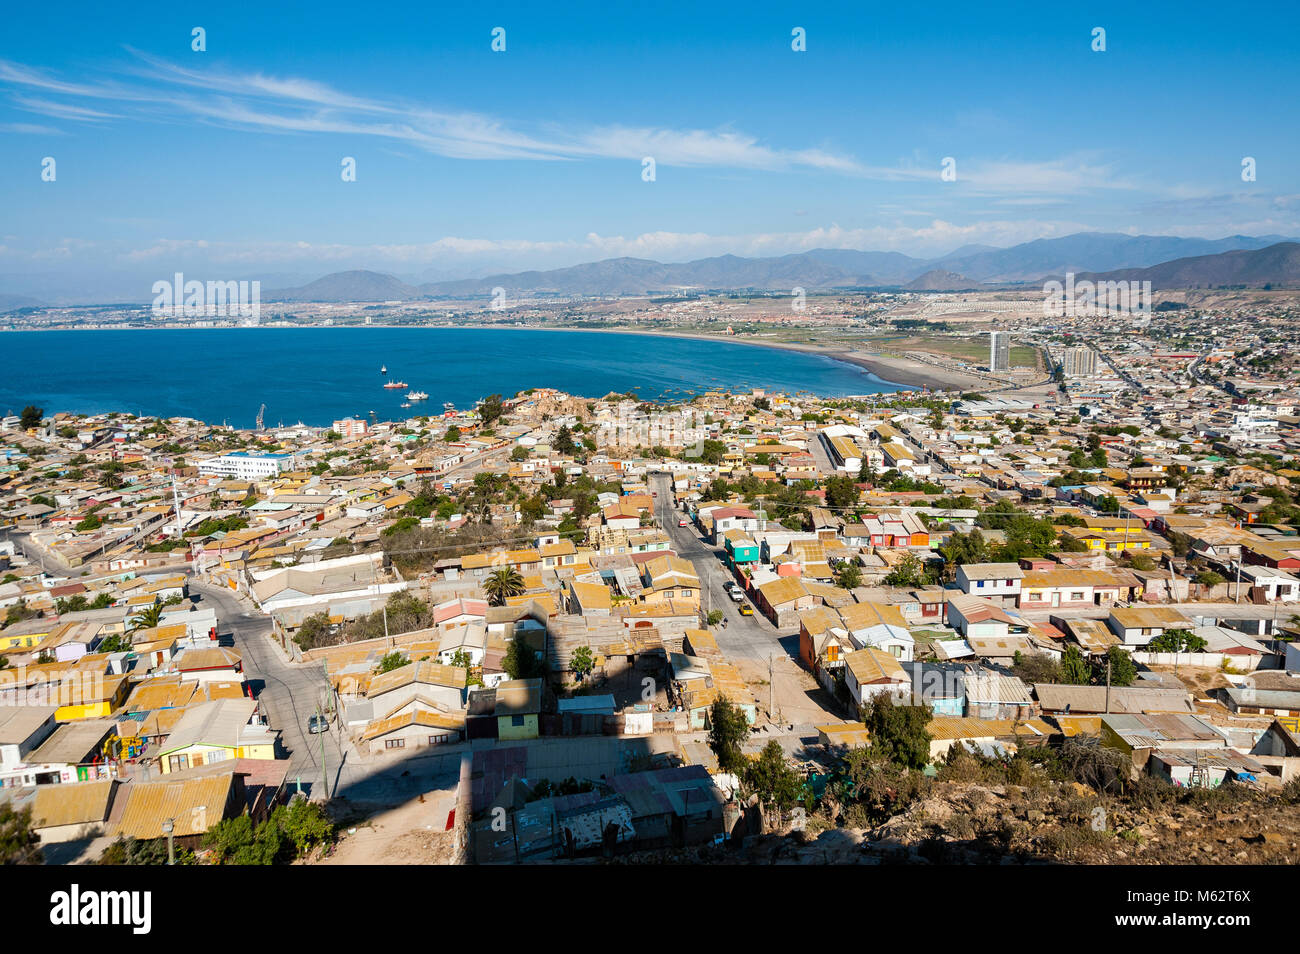 Coquimbo is a port city, commune and capital of the Elqui Province, located on the Pan-American Highway, in the Coquimbo Region of Chile. Stock Photo